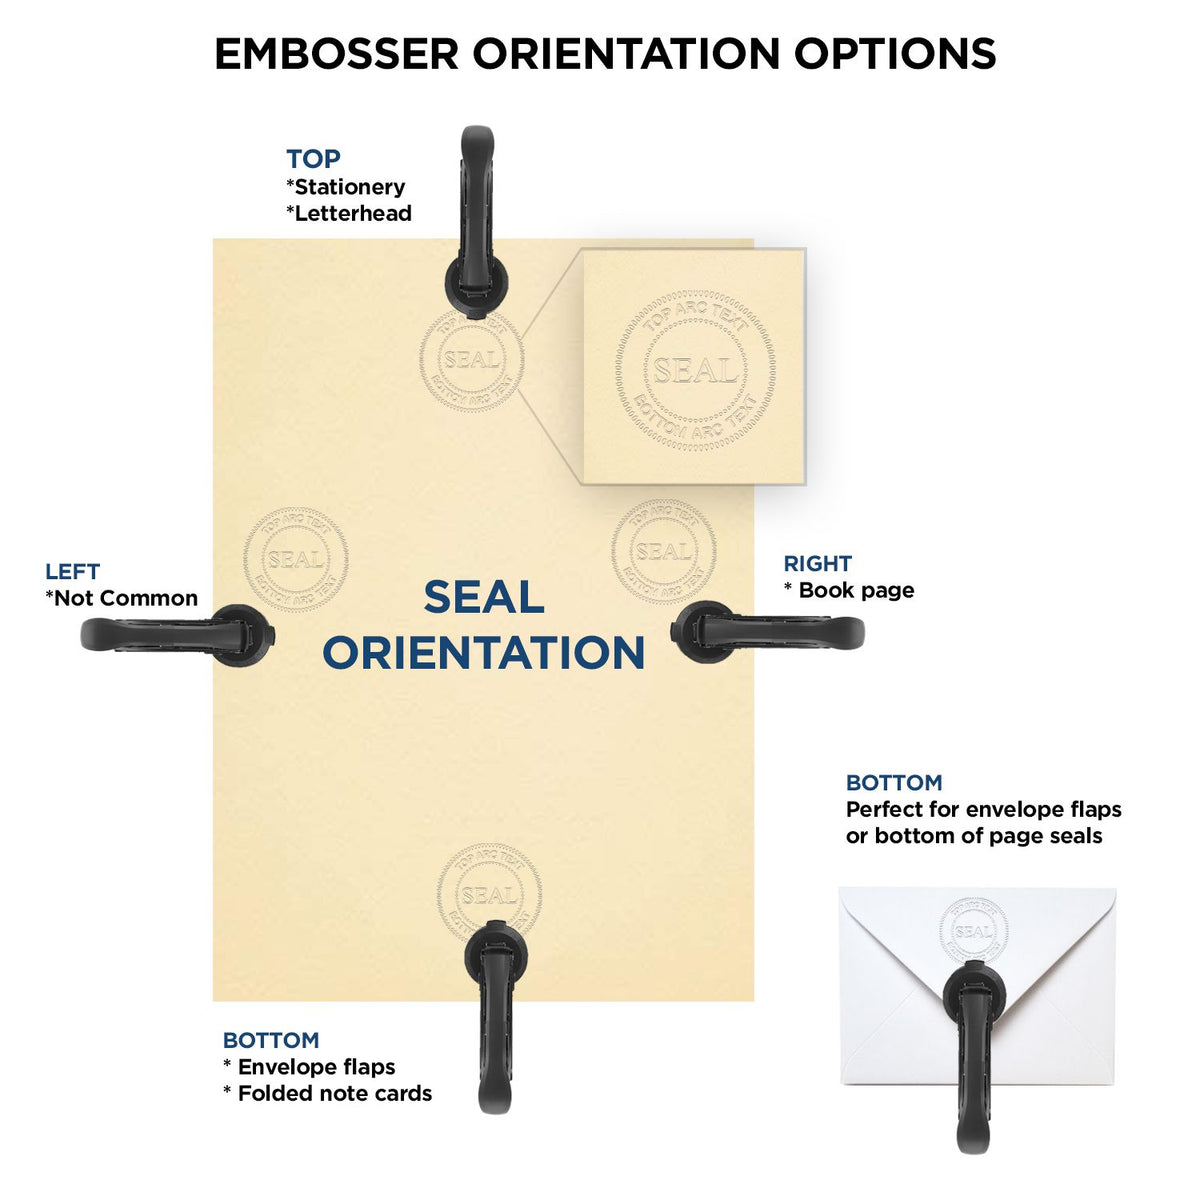 An infographic for the Handheld Massachusetts Professional Geologist Embosser showing embosser orientation, this is showing examples of a top, bottom, right and left insert.